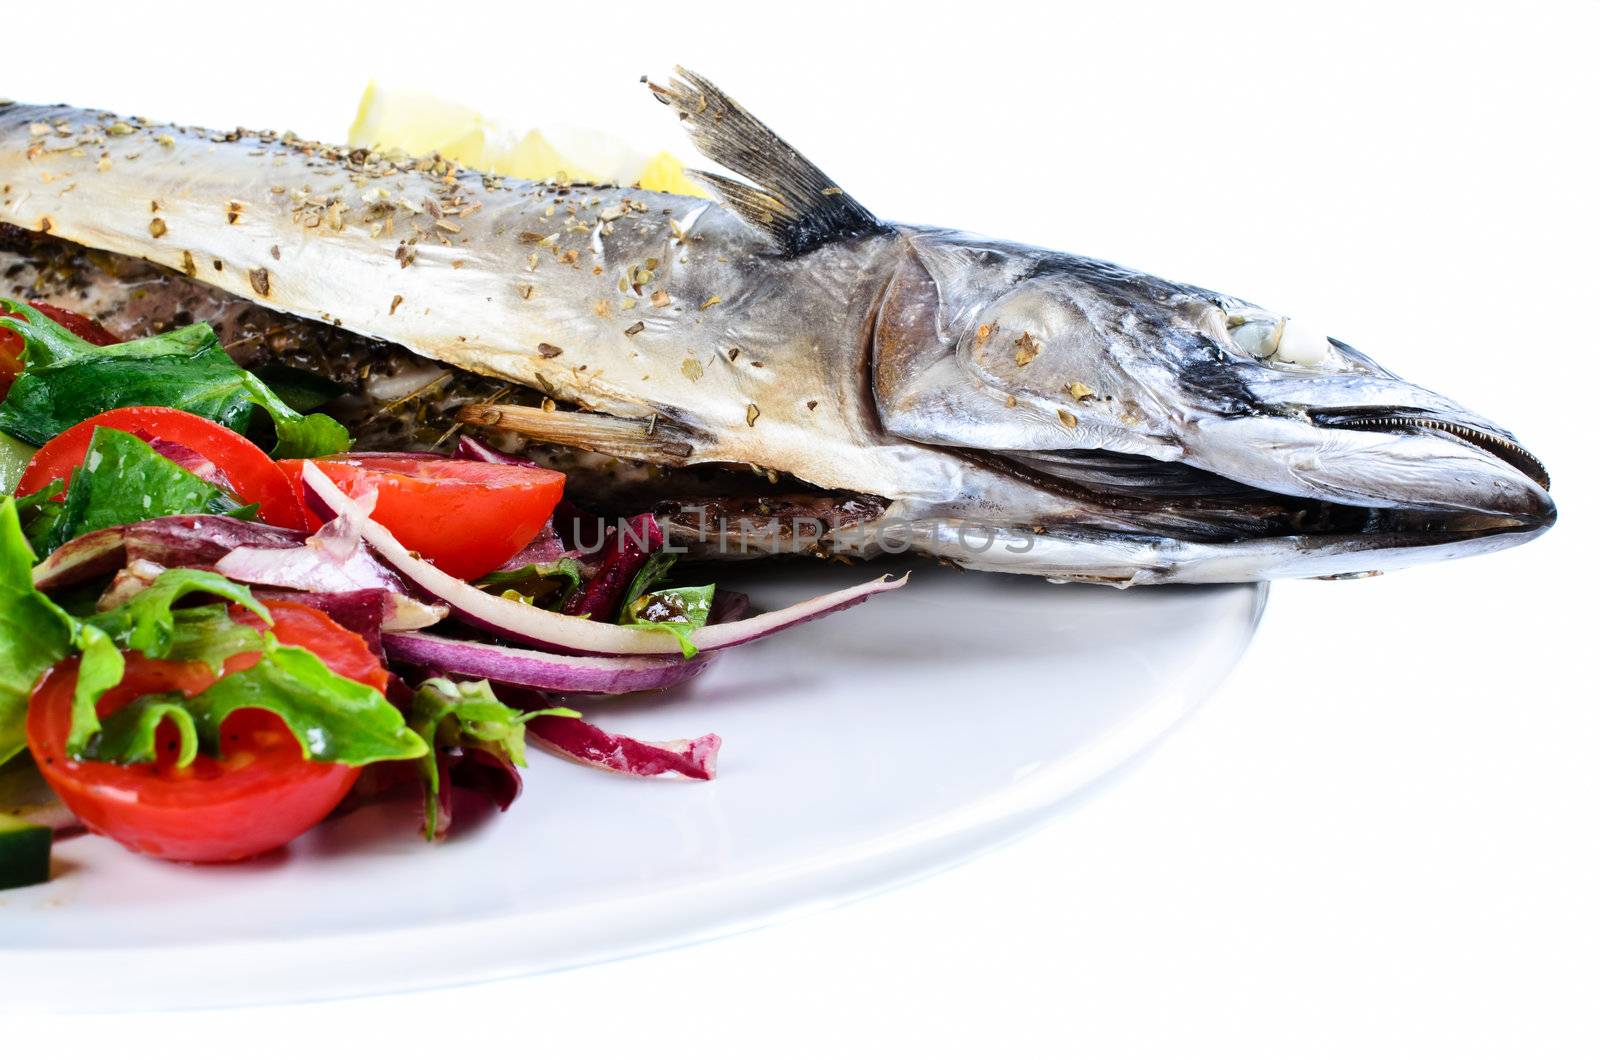 Grilled mackerel with vegetable salad by Nanisimova